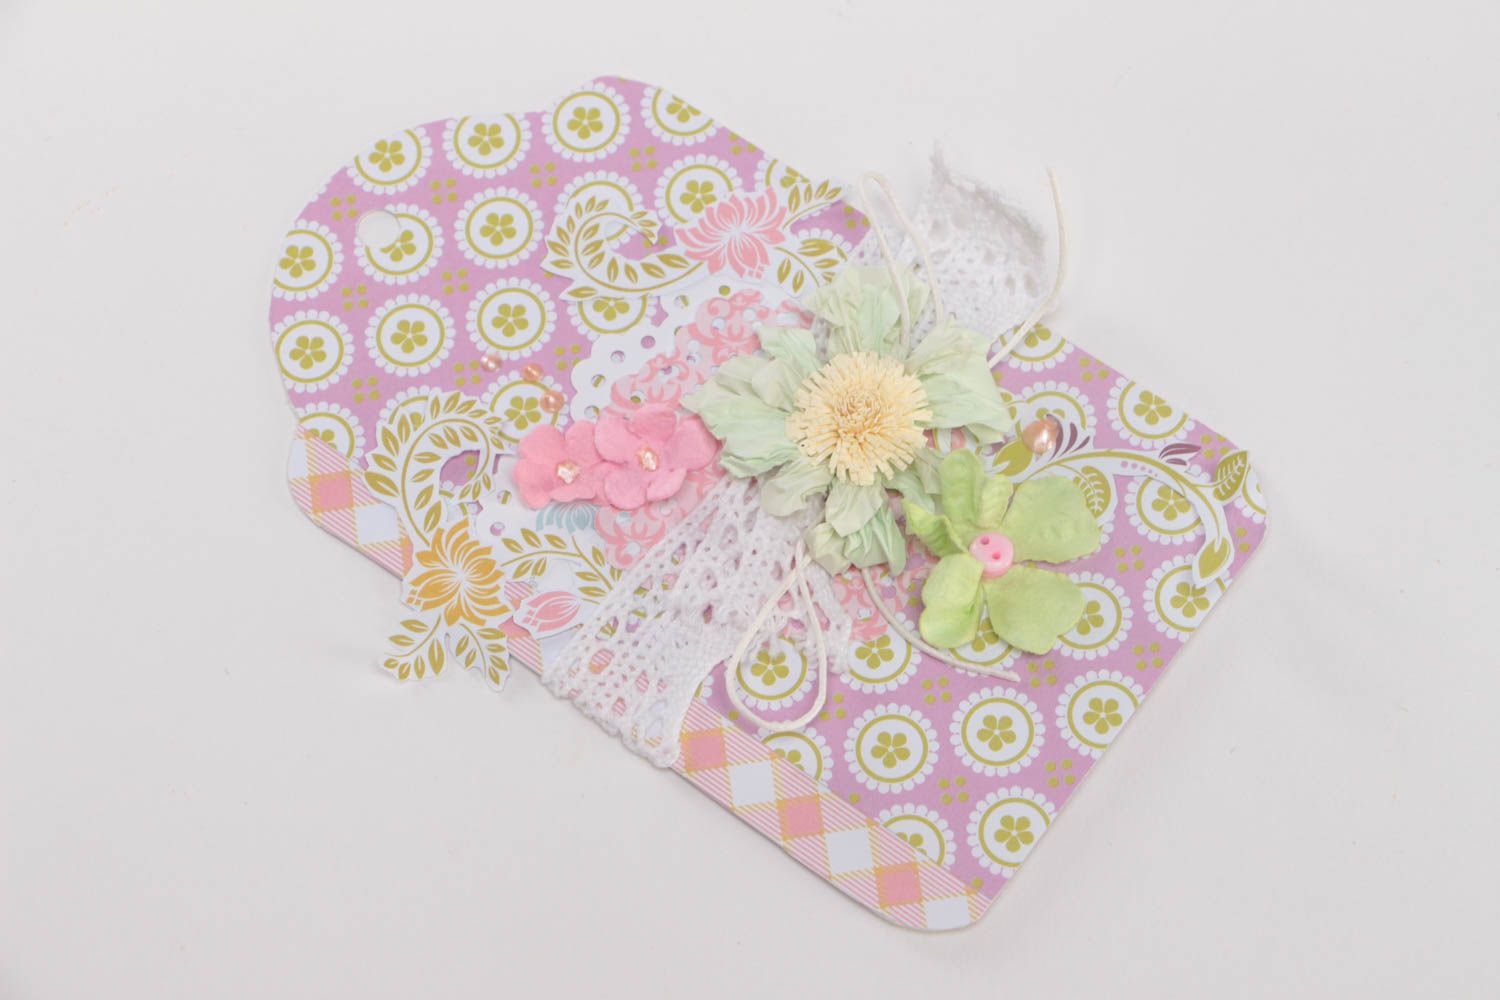 Handmade beautiful designer gift tag made using scrapbooking with flowers photo 2